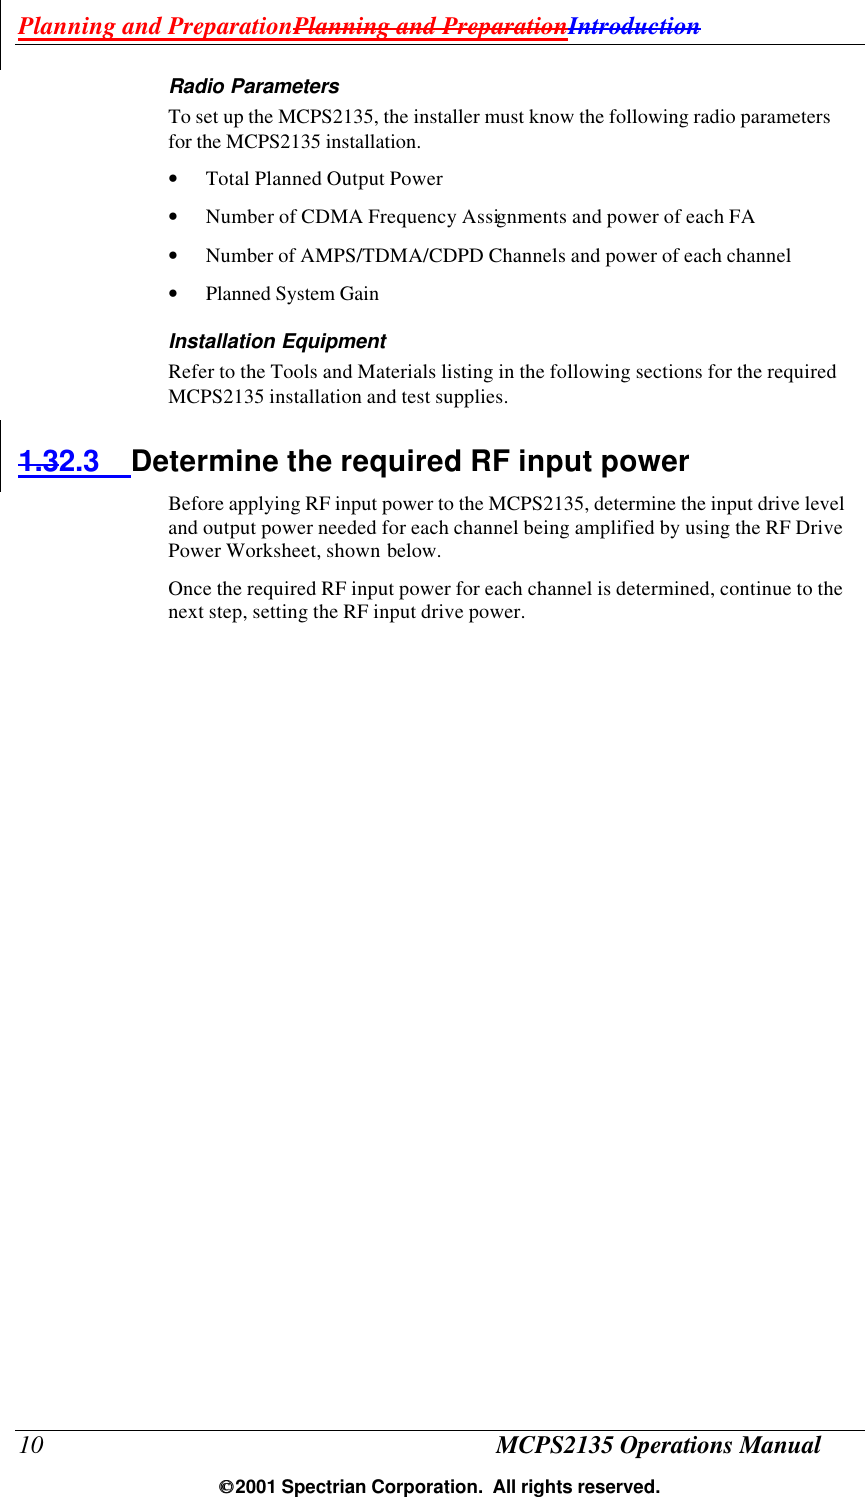 Planning and PreparationPlanning and PreparationIntroduction 10 MCPS2135 Operations Manual  2001 Spectrian Corporation.  All rights reserved. Radio Parameters To set up the MCPS2135, the installer must know the following radio parameters for the MCPS2135 installation. • Total Planned Output Power • Number of CDMA Frequency Assignments and power of each FA • Number of AMPS/TDMA/CDPD Channels and power of each channel • Planned System Gain Installation Equipment Refer to the Tools and Materials listing in the following sections for the required MCPS2135 installation and test supplies. 1.32.3 Determine the required RF input power Before applying RF input power to the MCPS2135, determine the input drive level and output power needed for each channel being amplified by using the RF Drive Power Worksheet, shown below.  Once the required RF input power for each channel is determined, continue to the next step, setting the RF input drive power. 